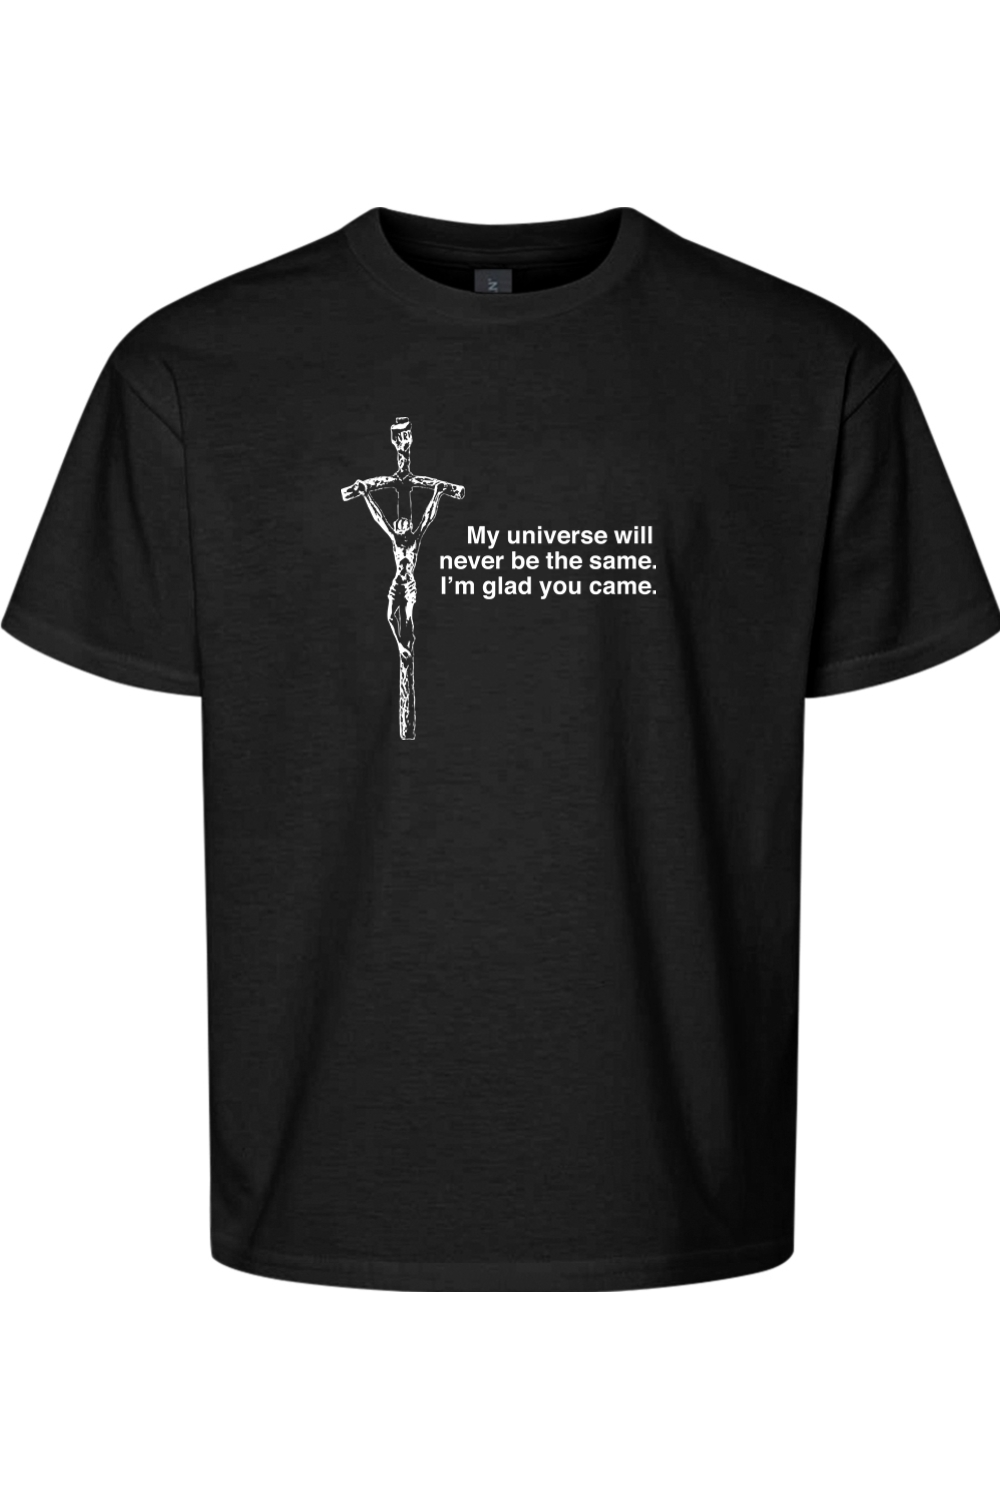 Glad He Came - Crucifix Youth T-Shirt